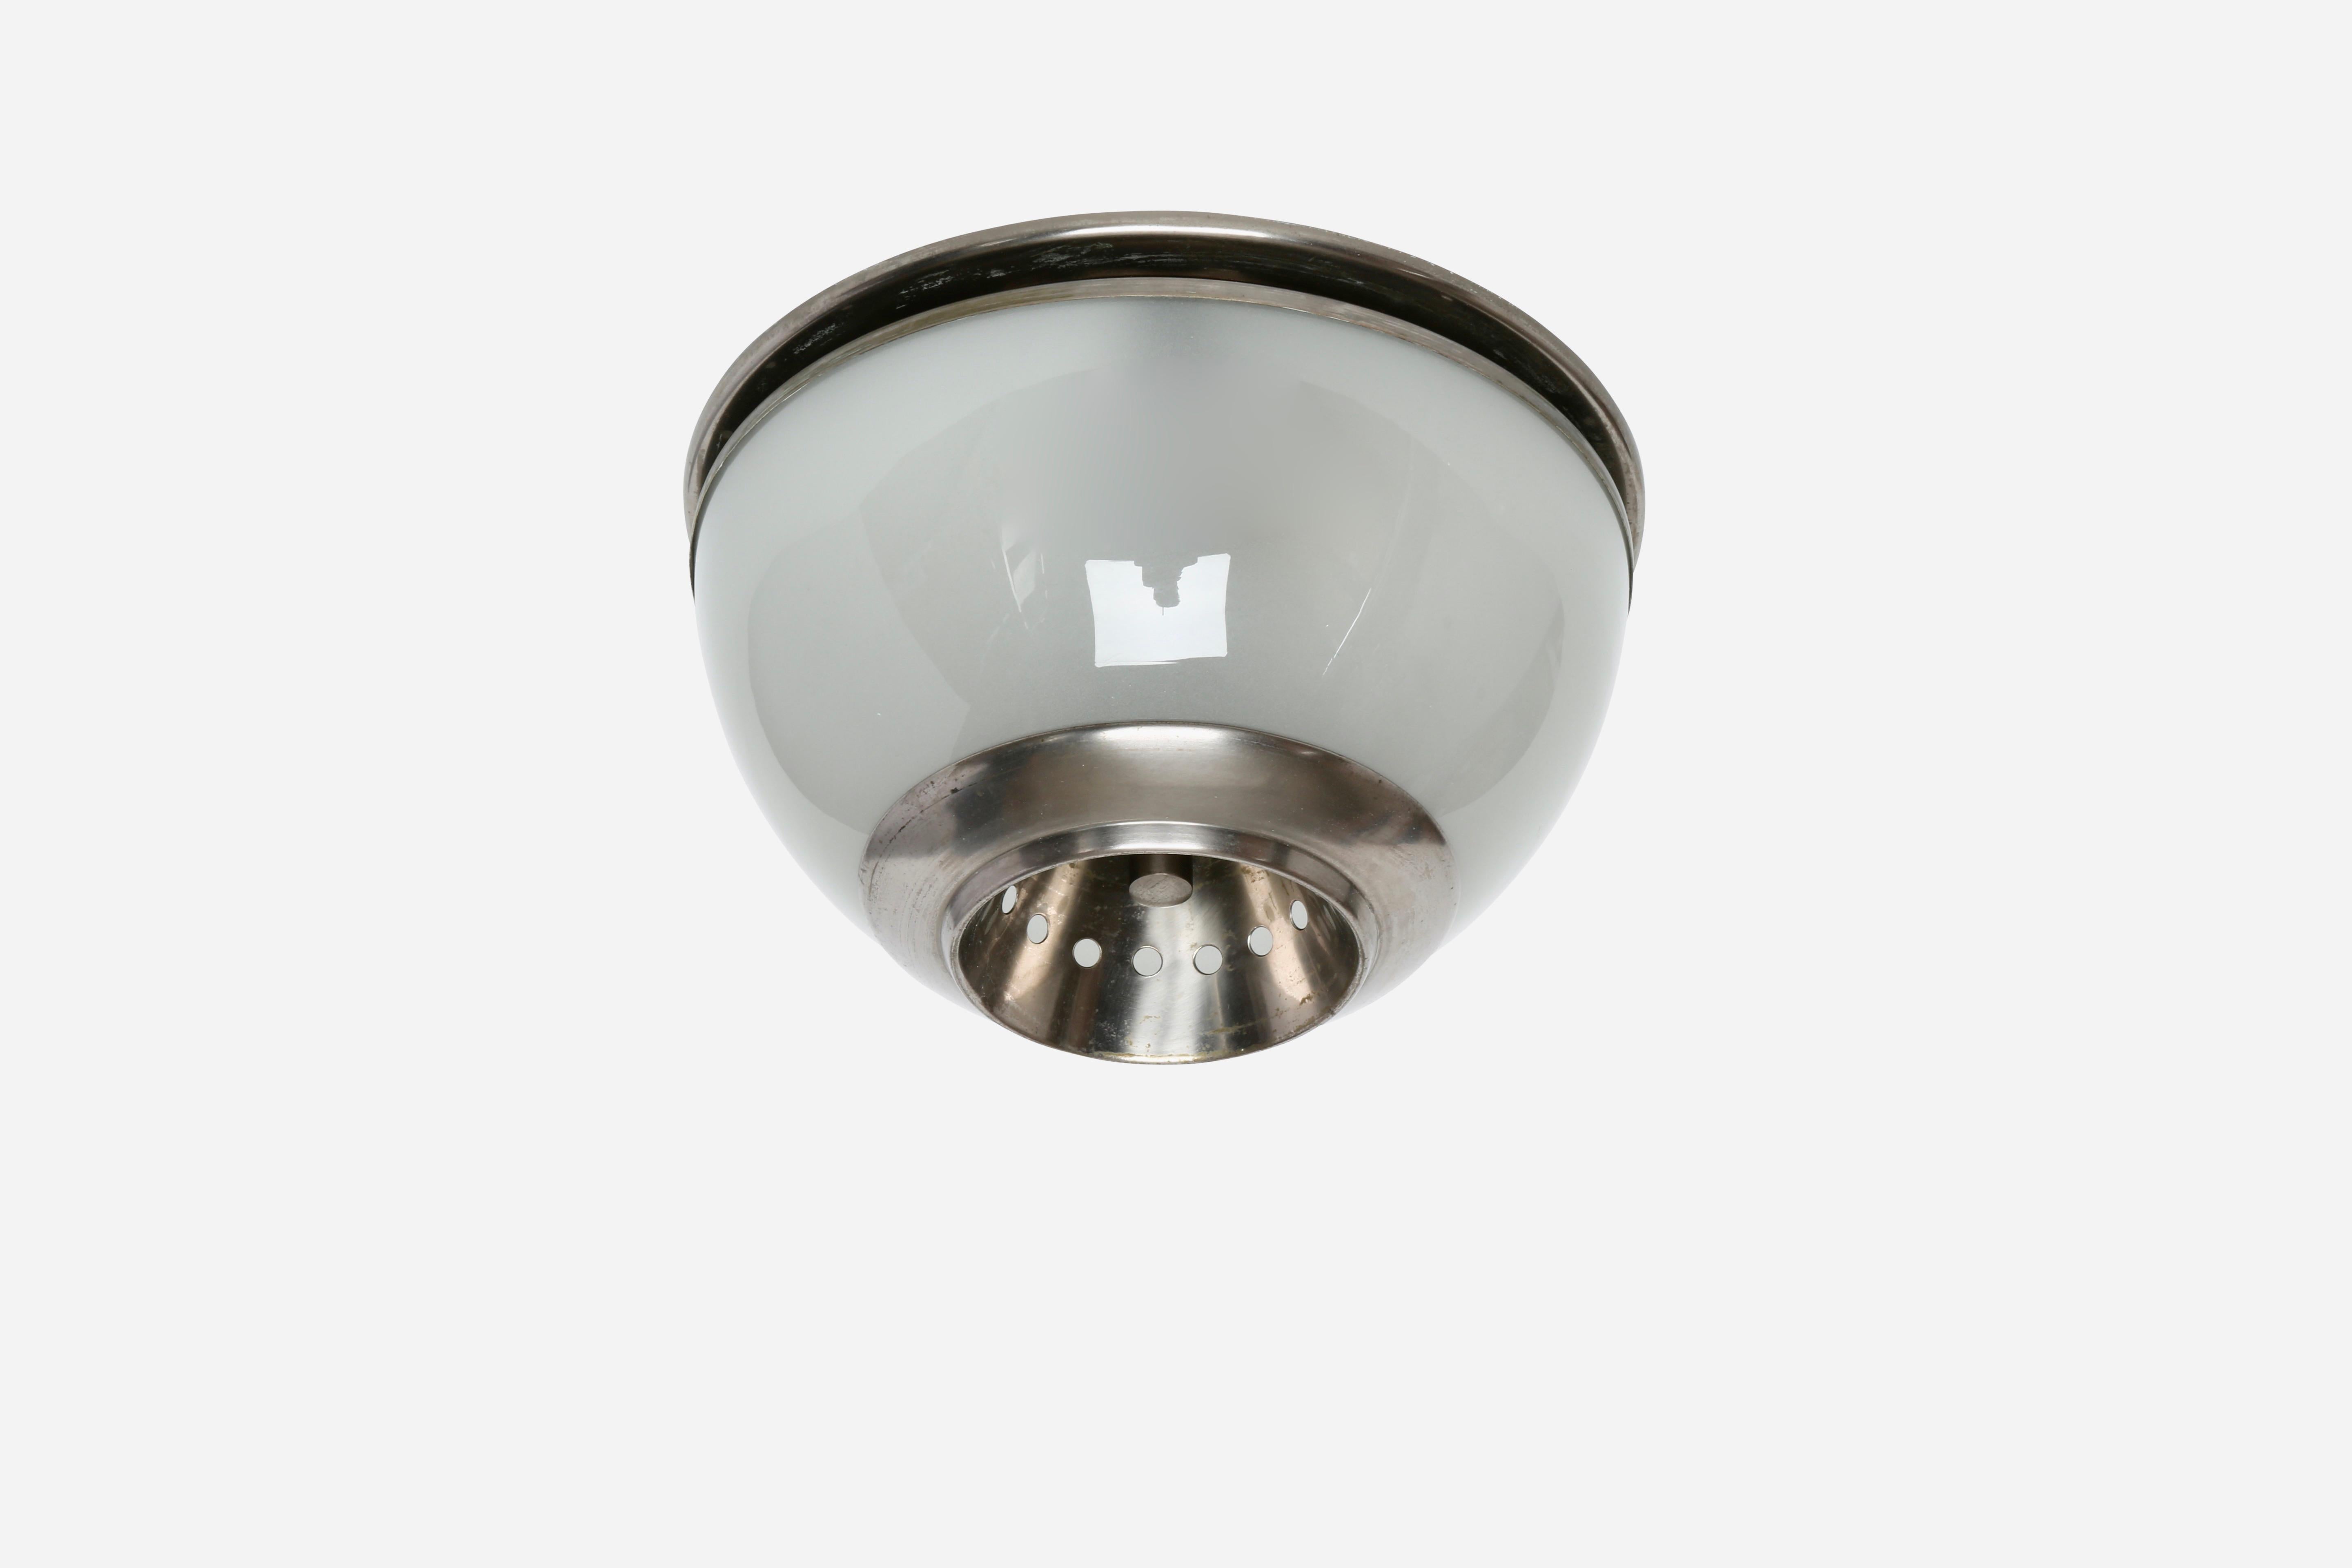 Luigi Caccia Dominini for Azucena ceiling or wall light LSP3.
Designed and manufactured in Italy in 1960s
Frosted glass, nickel plated brass
Two medium base sockets.
Complimentary US rewiring upon request.